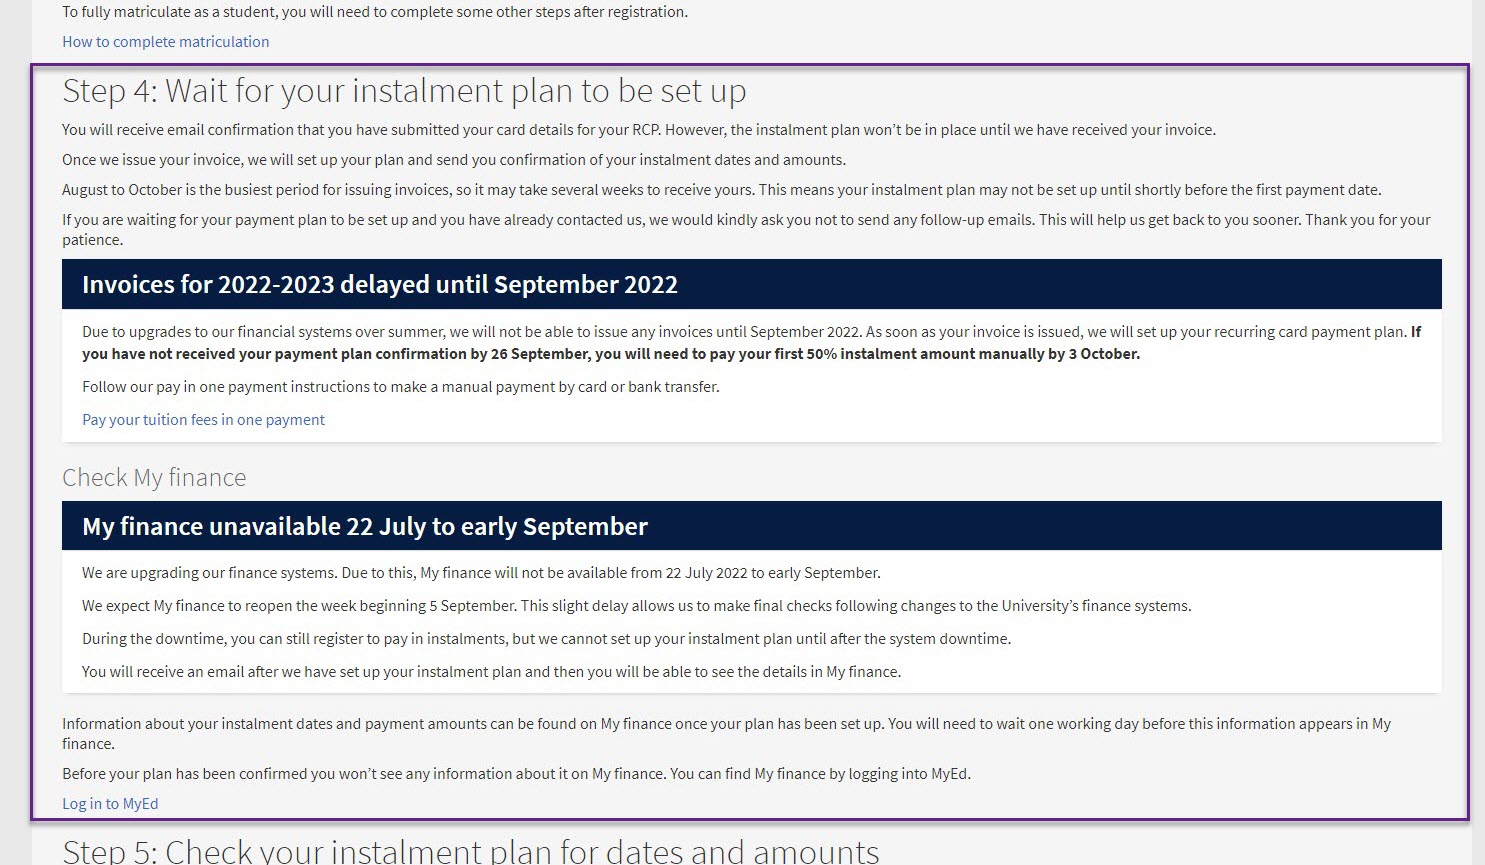 Screenshot from the pay by instalment web page with temporary service alerts that explain what services will be unavailable, for step 4, and how it will affect students